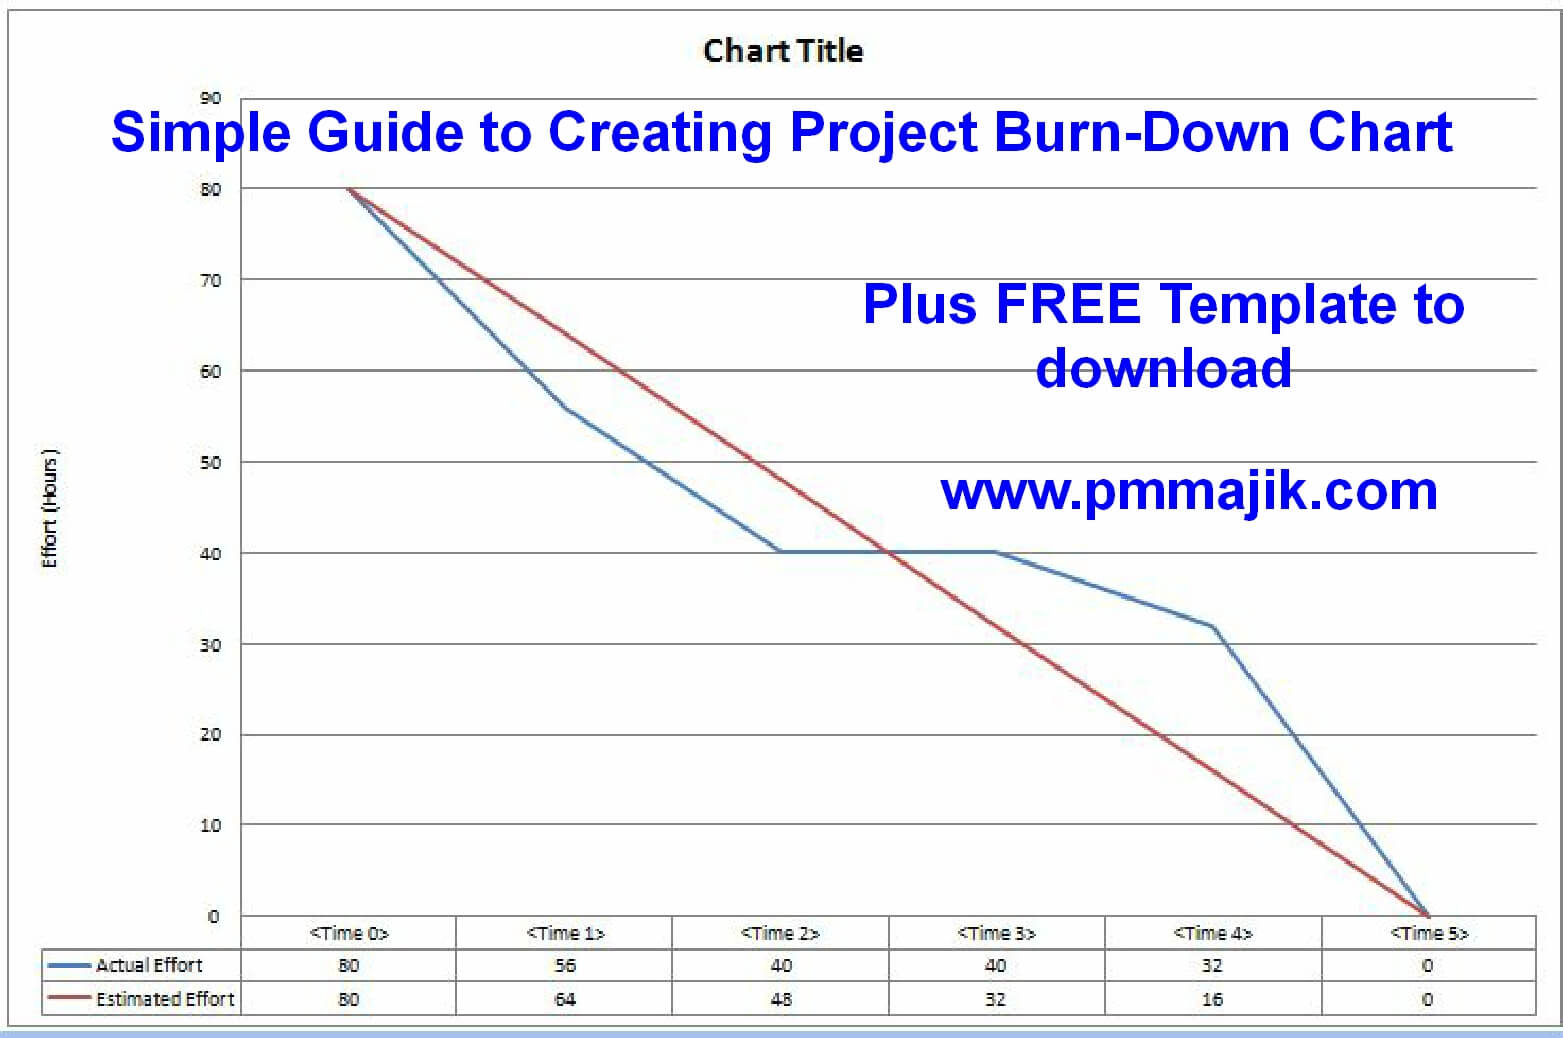 Agile: Simple guide to creating a project burn-down chart